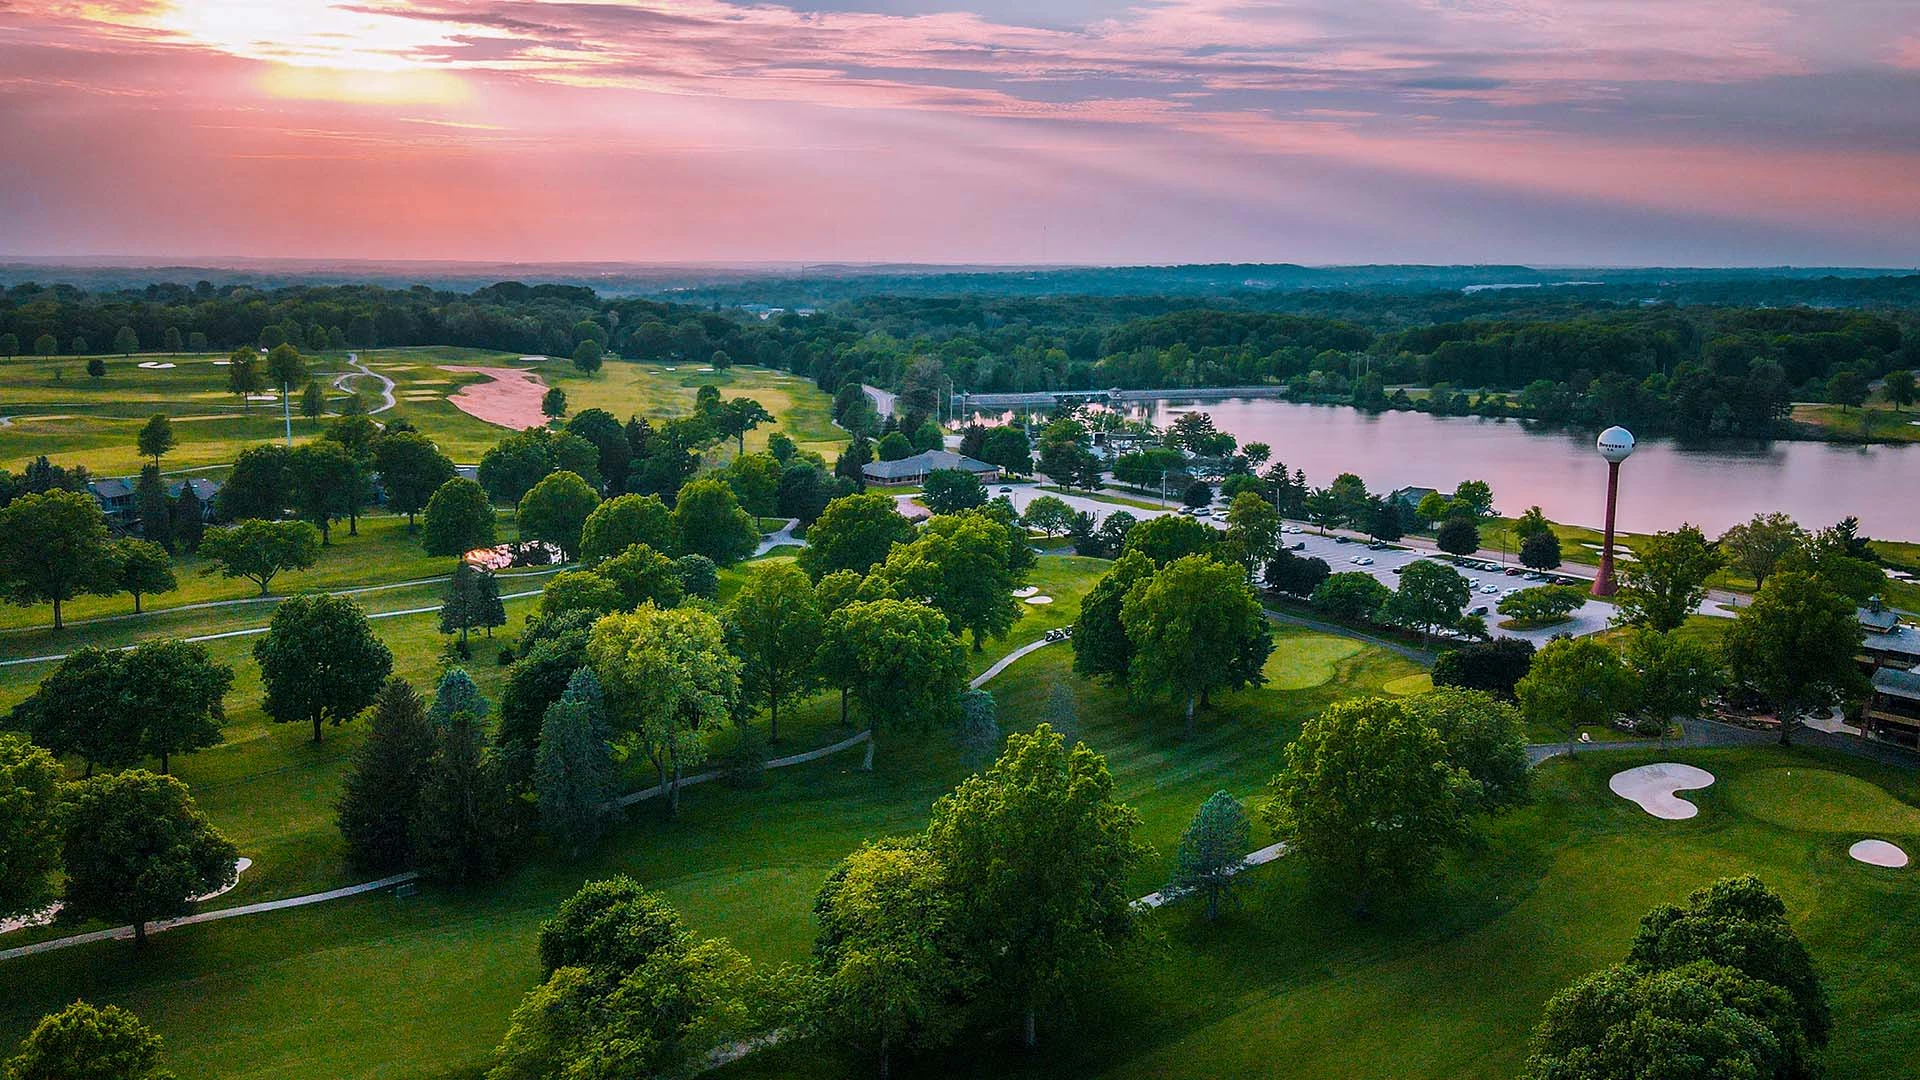 Firestone drone shot during the sunset